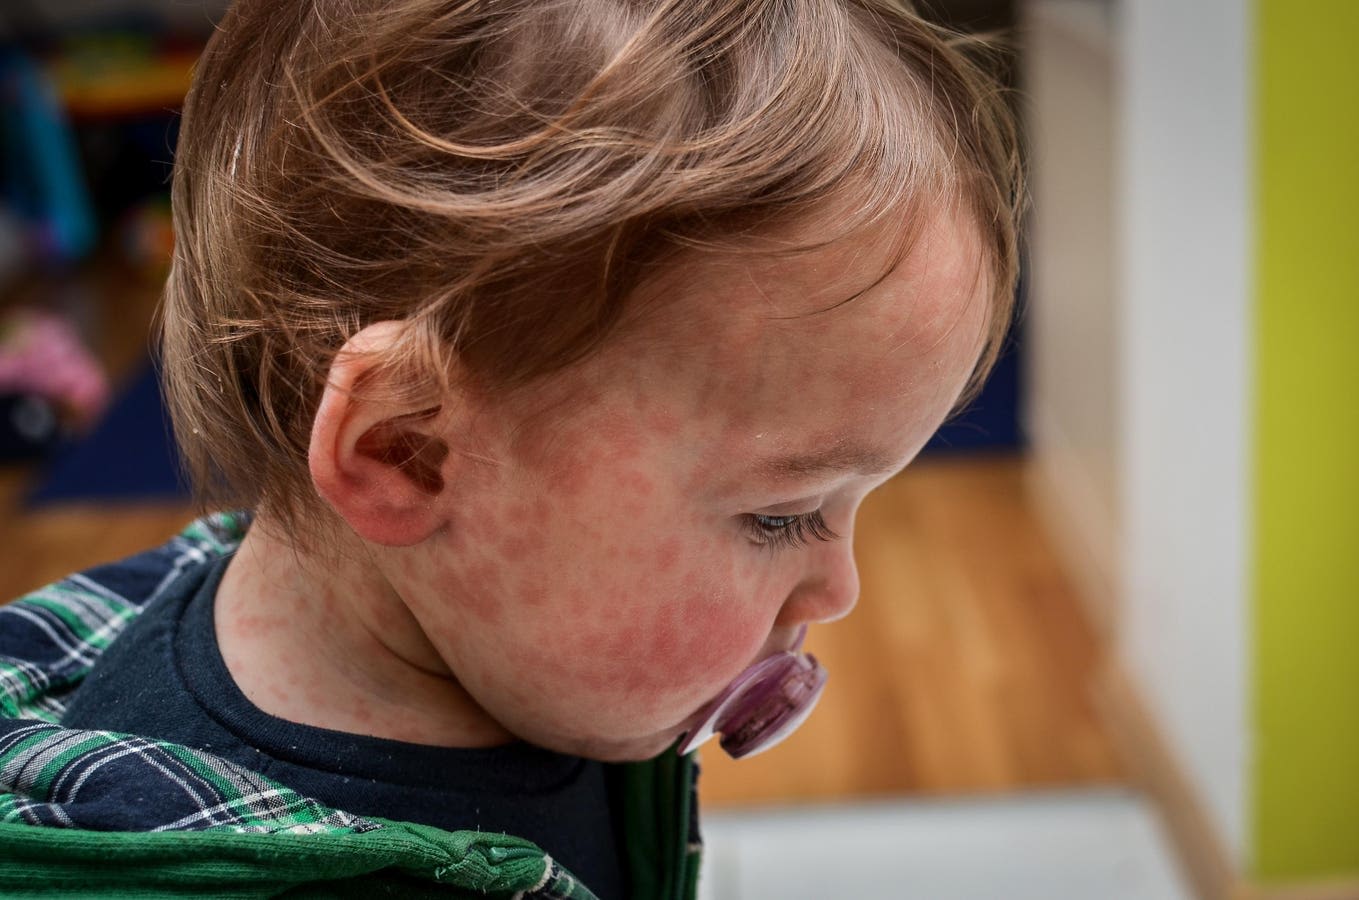 London Measles Outbreak Reported Cases Continue To Rise In U.K.